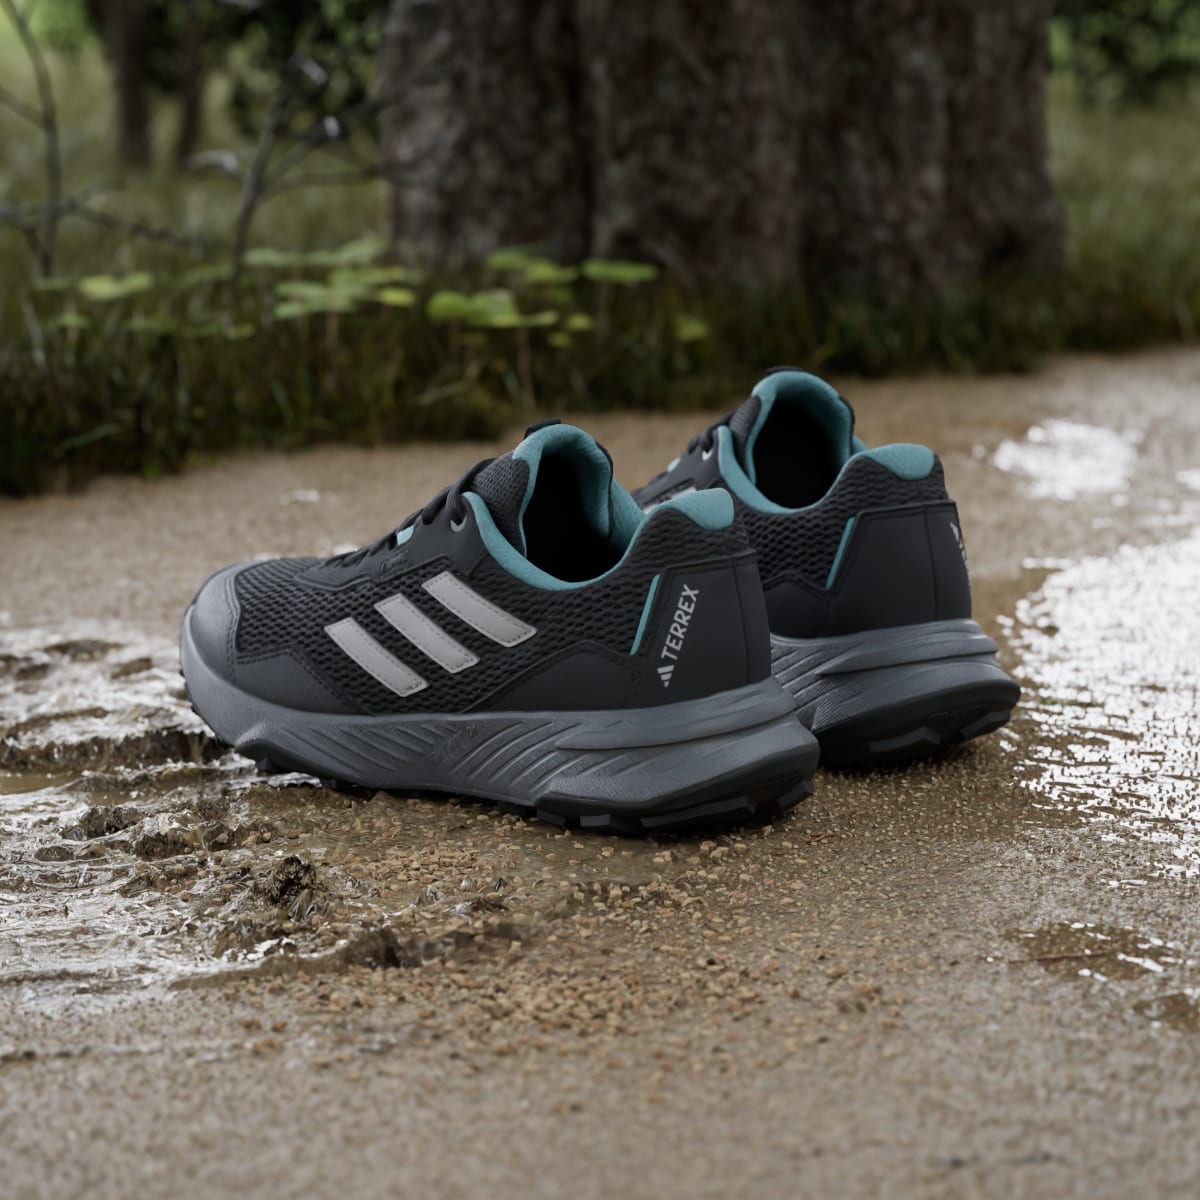 Adidas Tracefinder Trail Running Shoes. 6